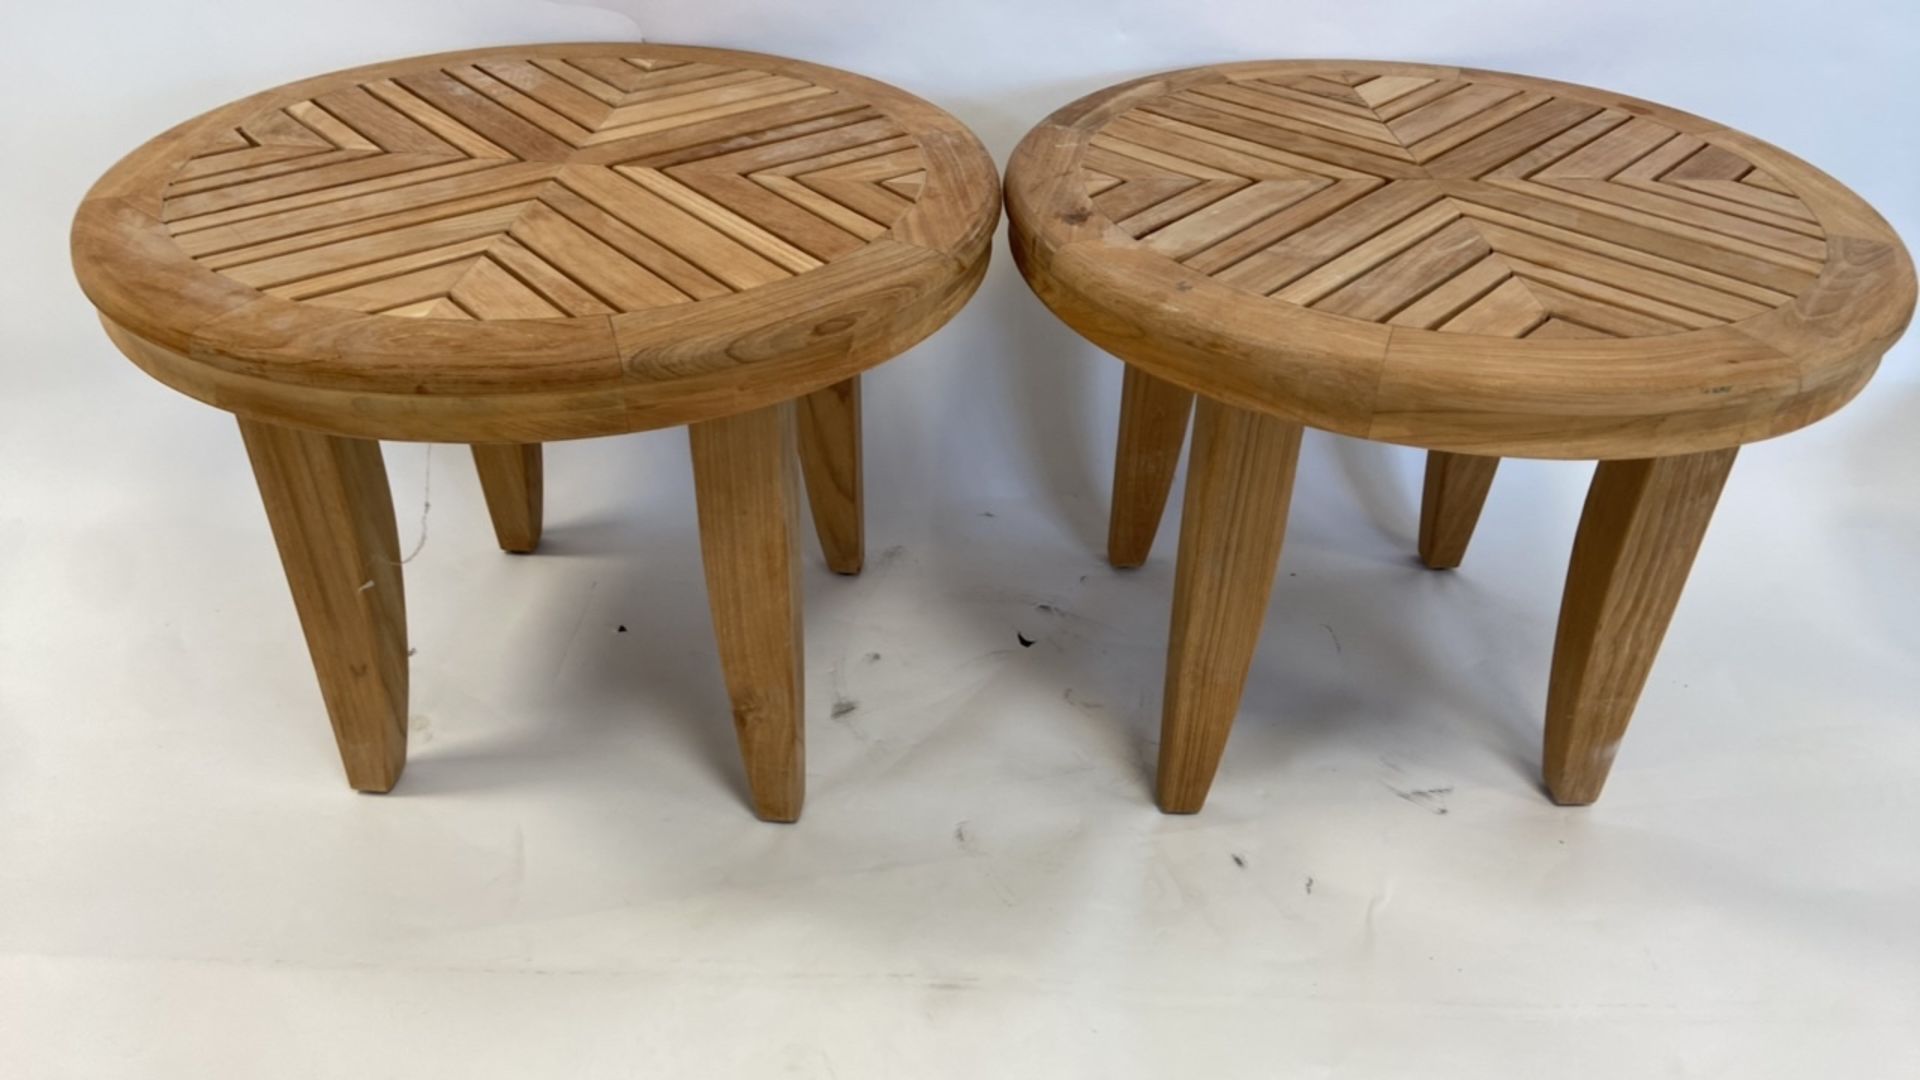 Outdoor Wooden Tables - Image 2 of 3